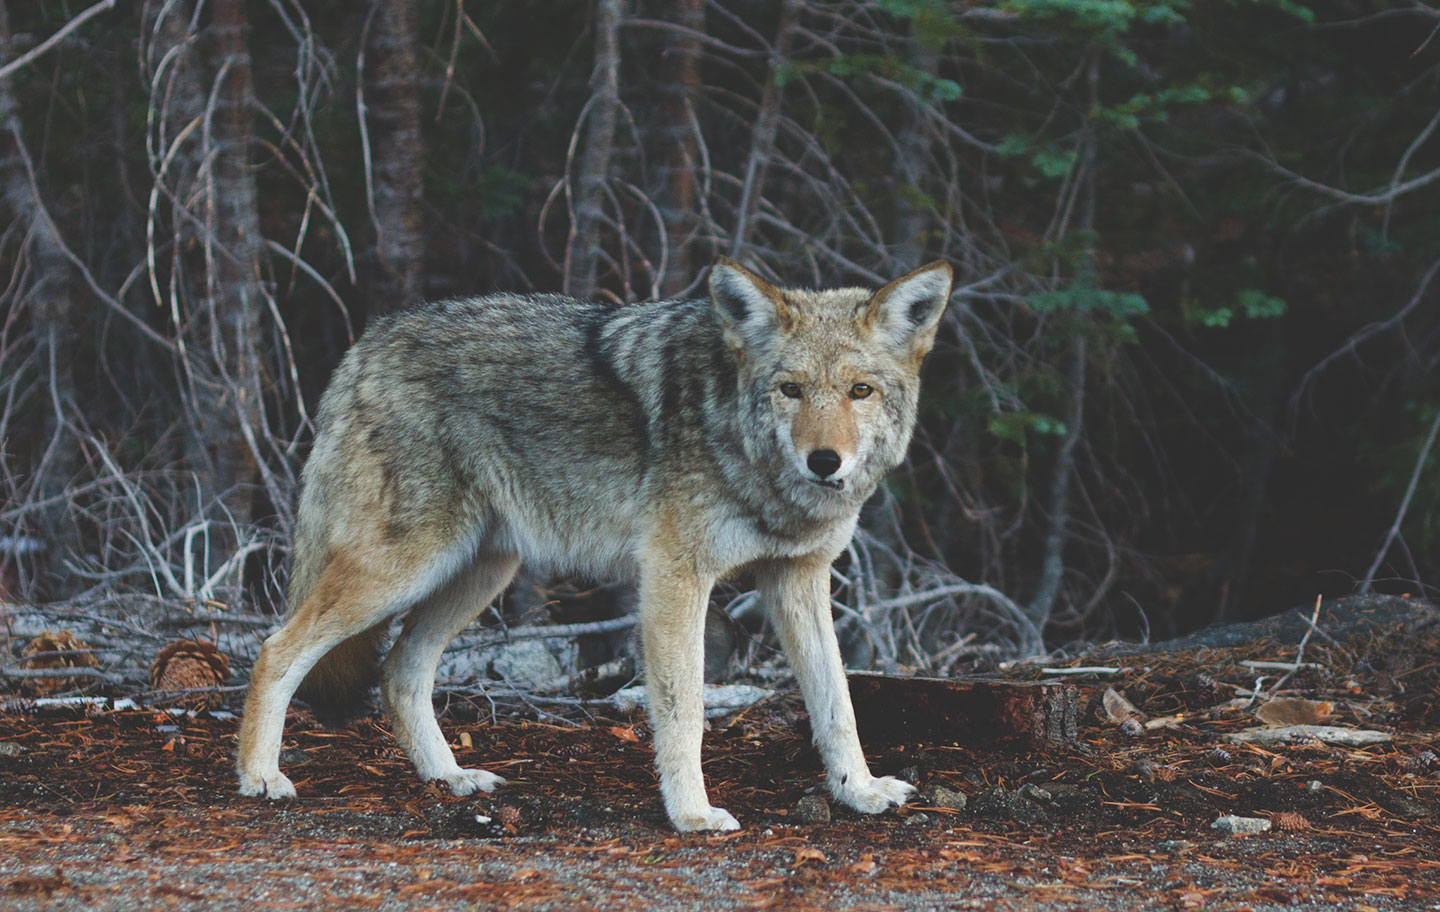 A wolf in a forested area